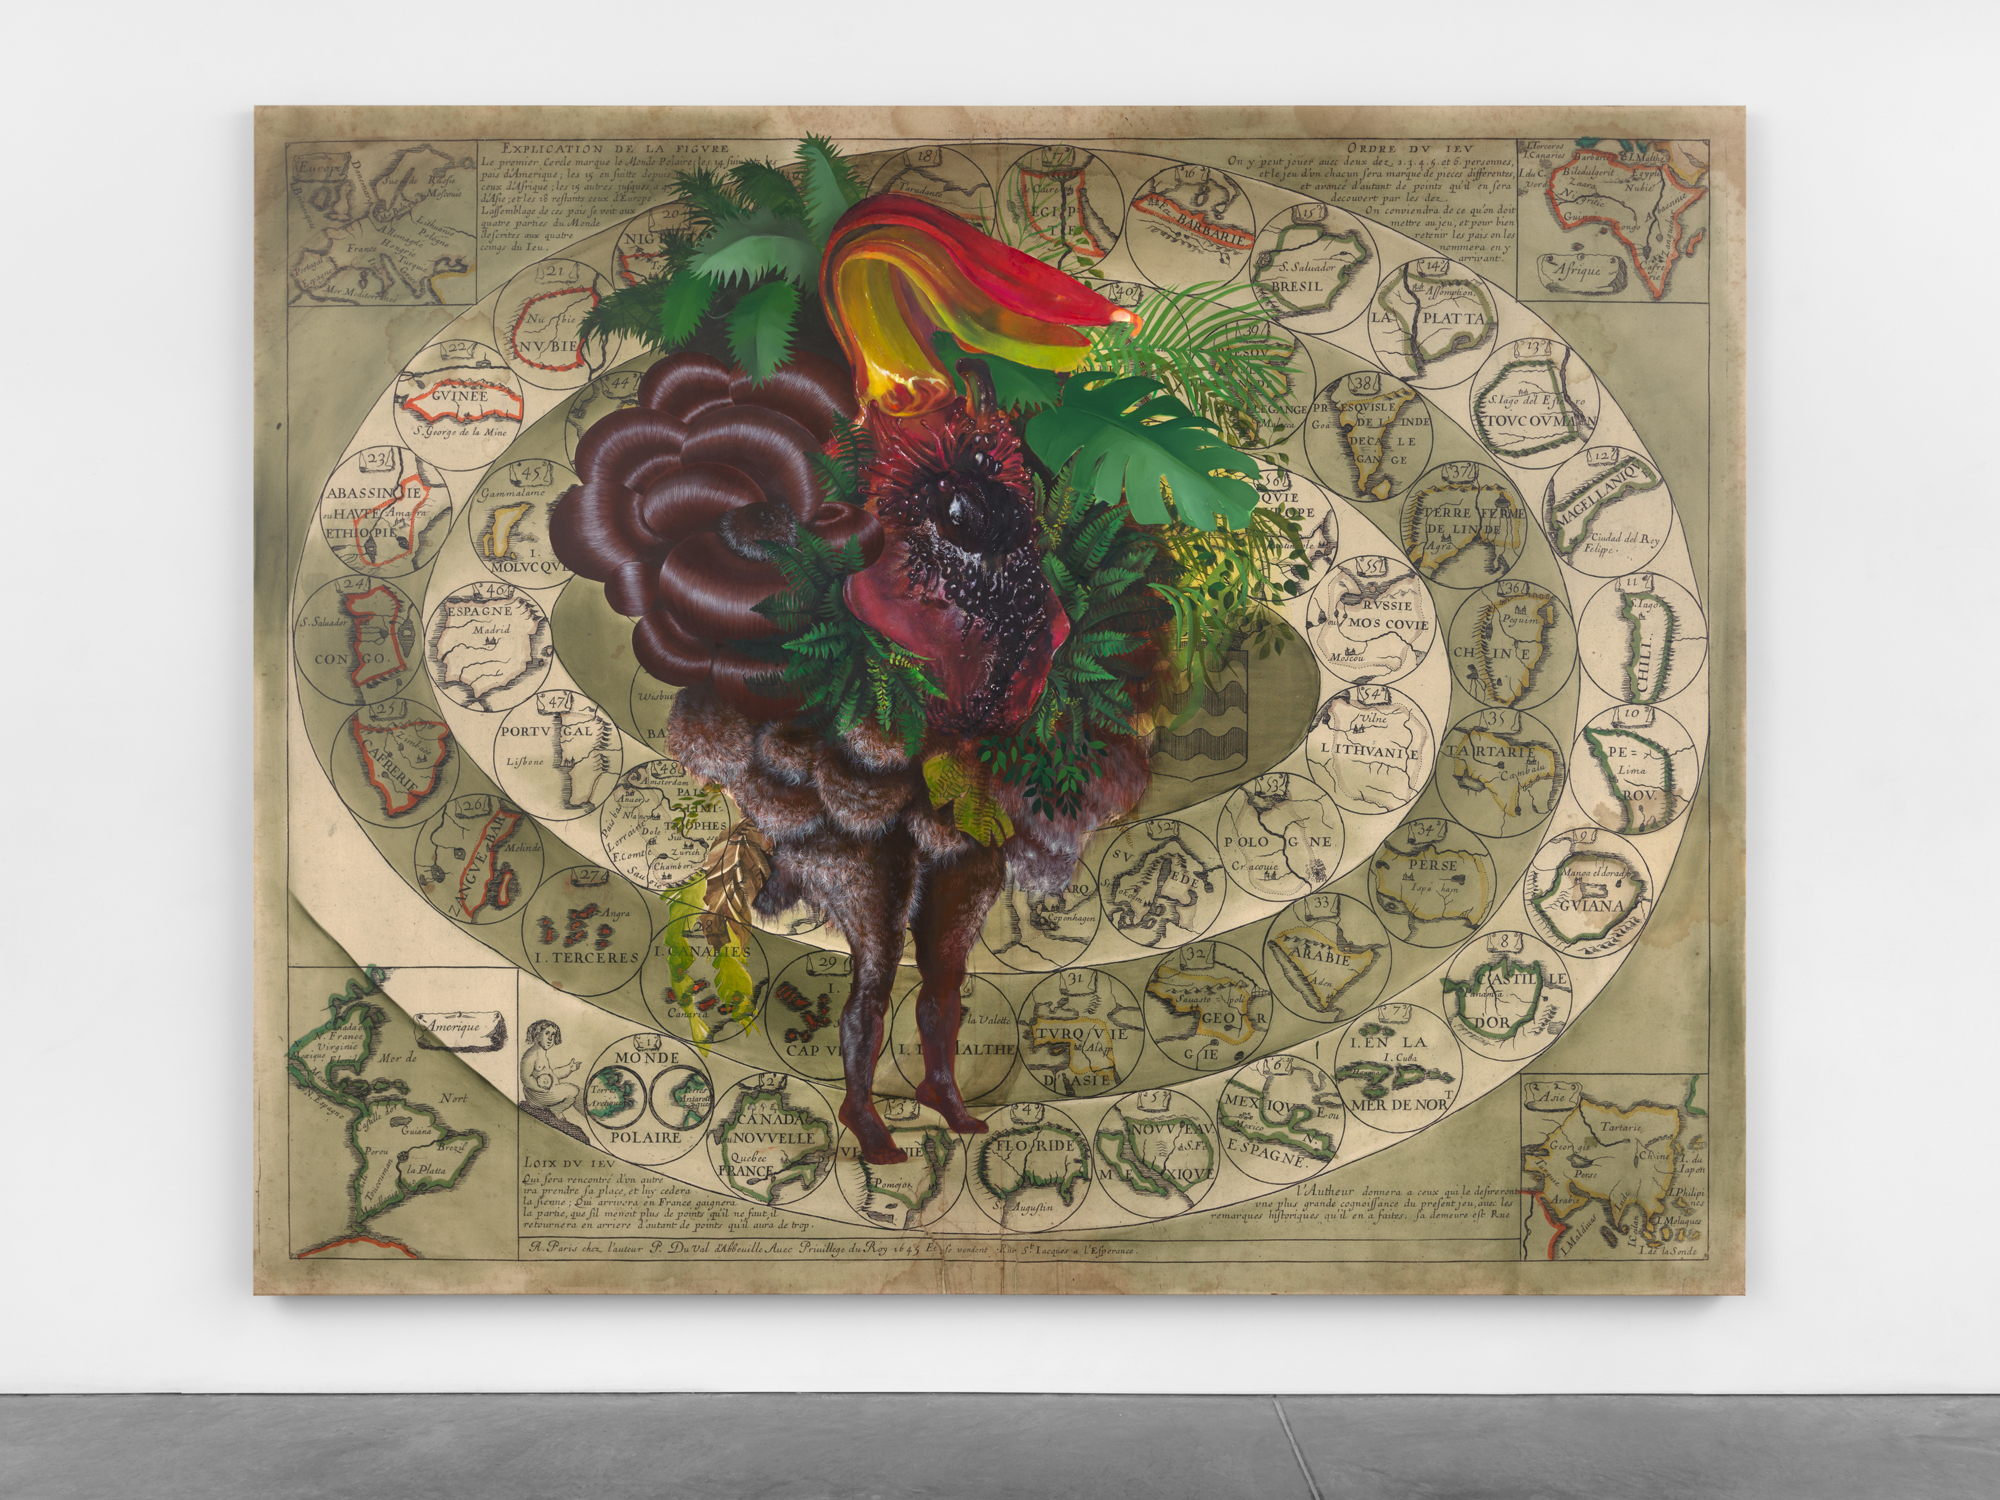 An oil and acrylic painting on a printed canvas which shows a colorful floral and feathered ciguapa figure painted atop a print of the 1645 geographical game “Le Jeu du Monde